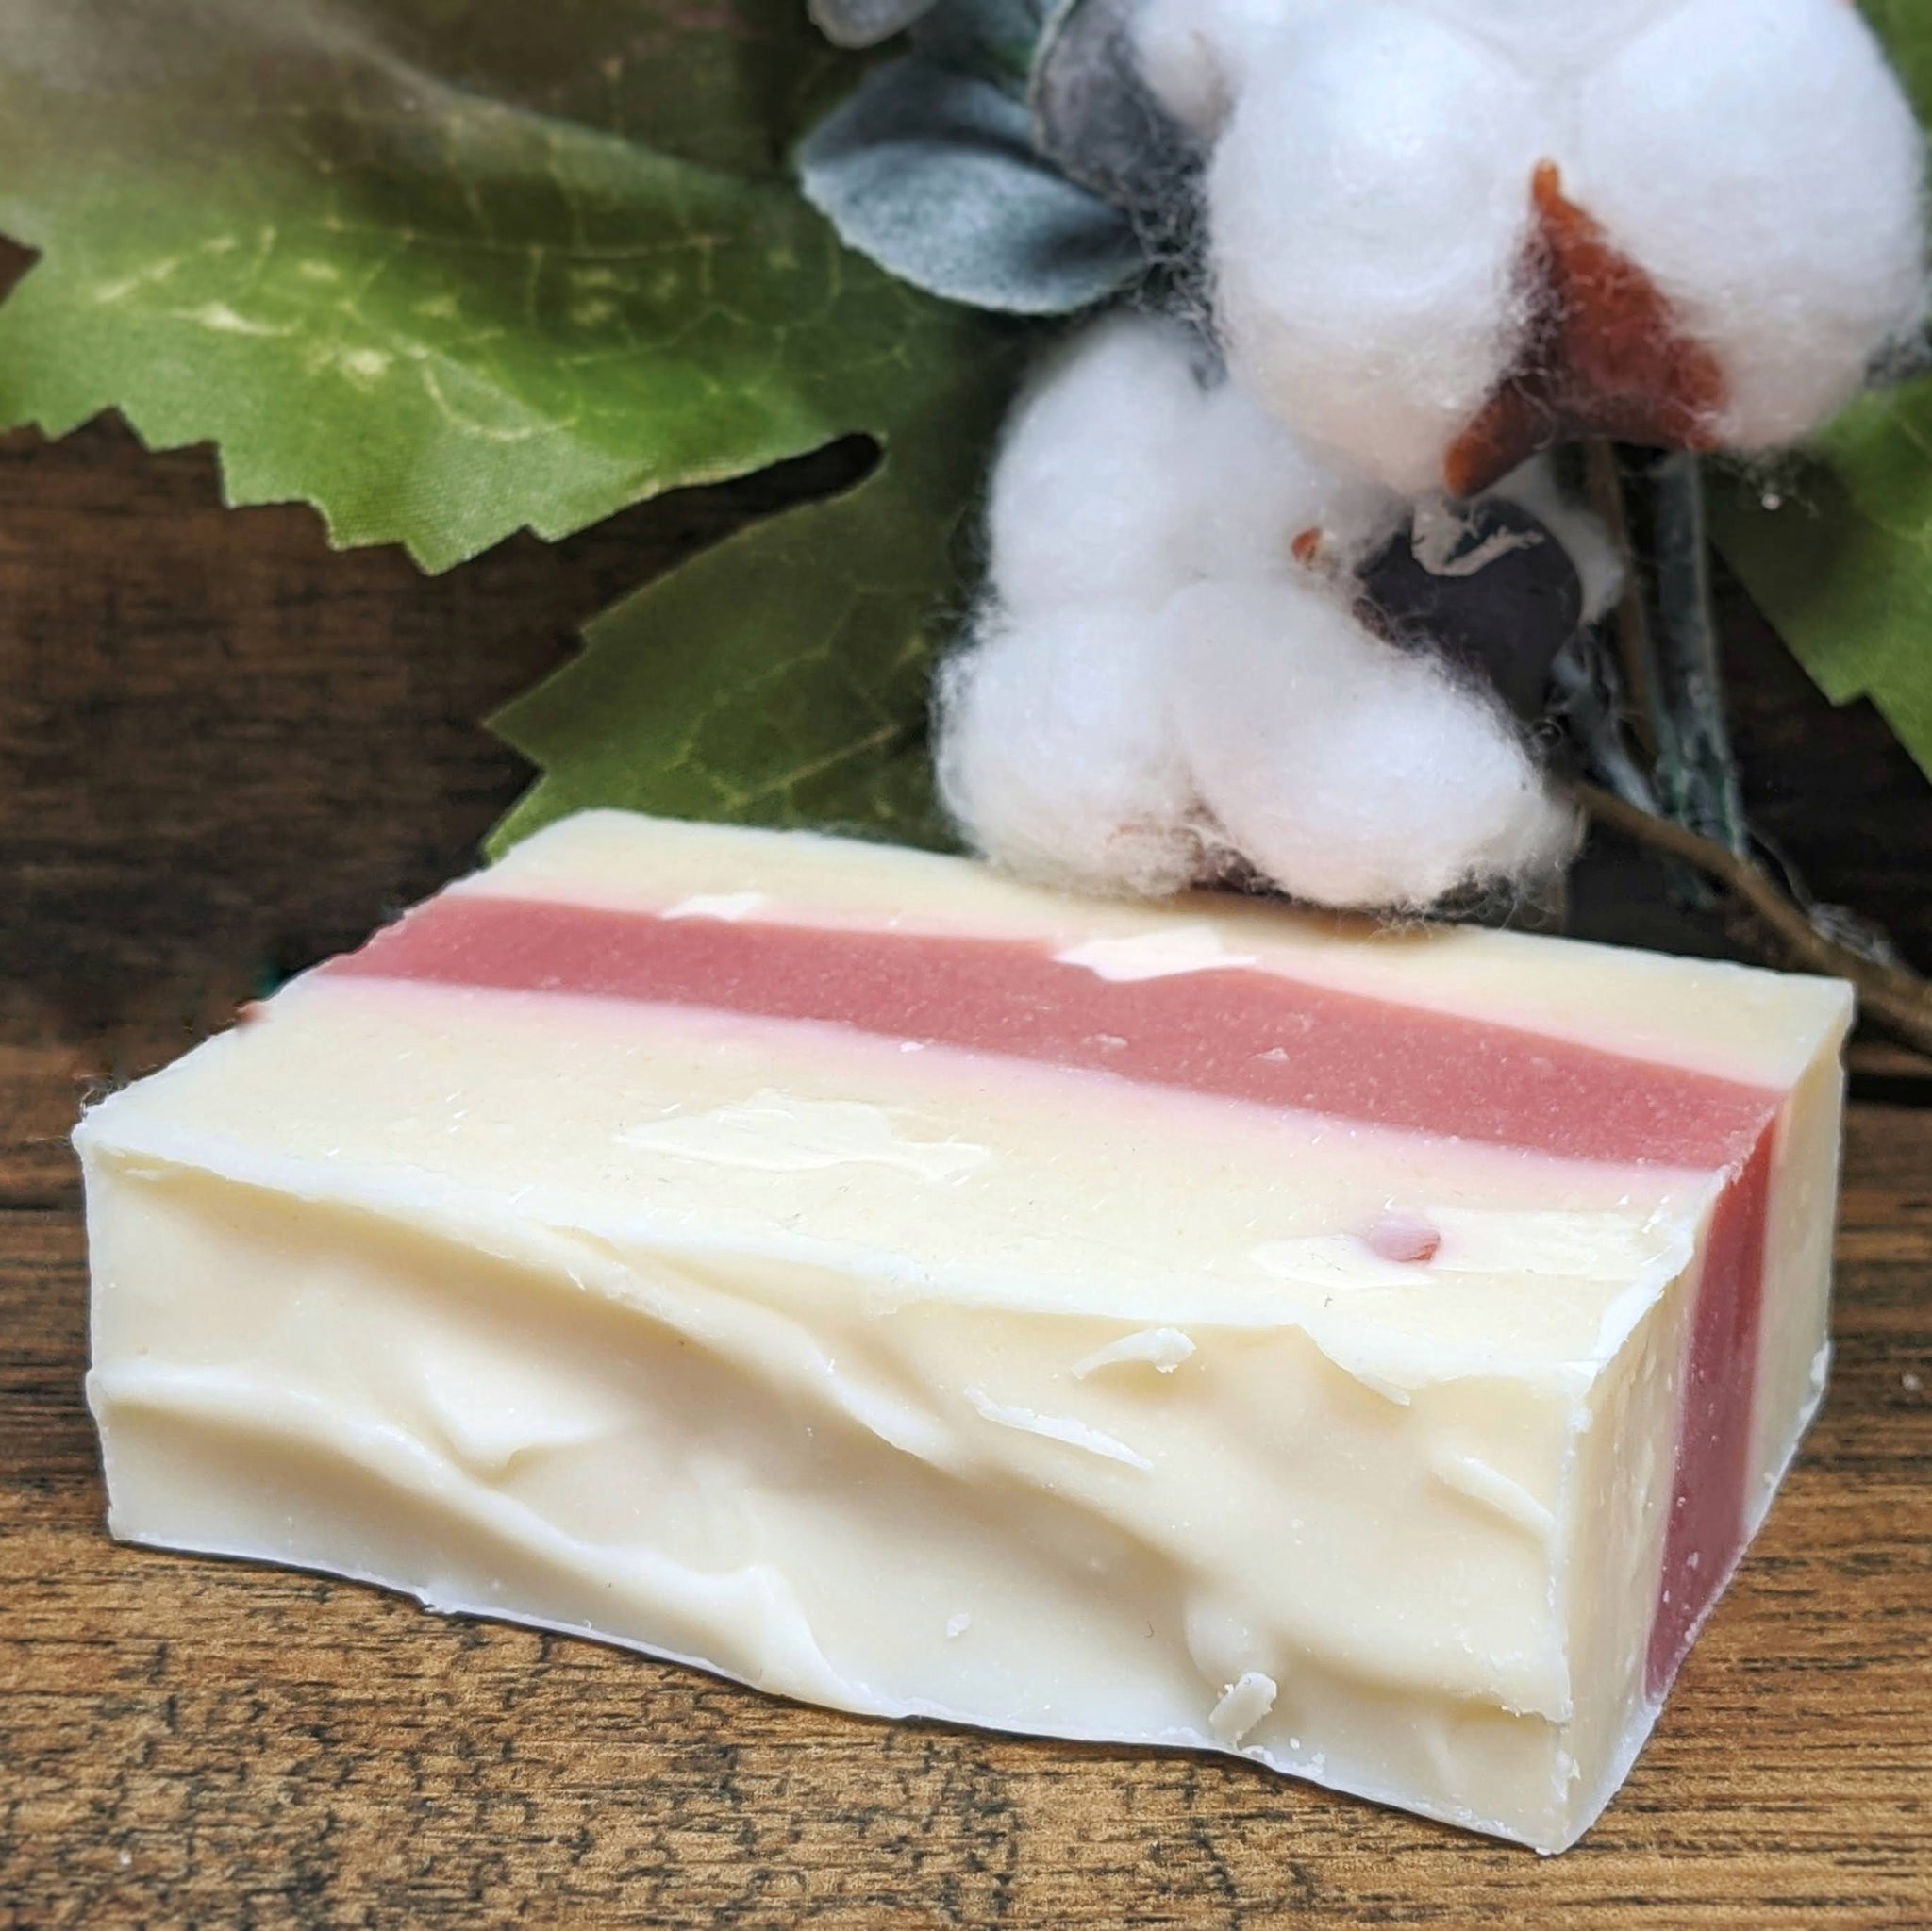 Peppermint Handcrafted Soap Bar